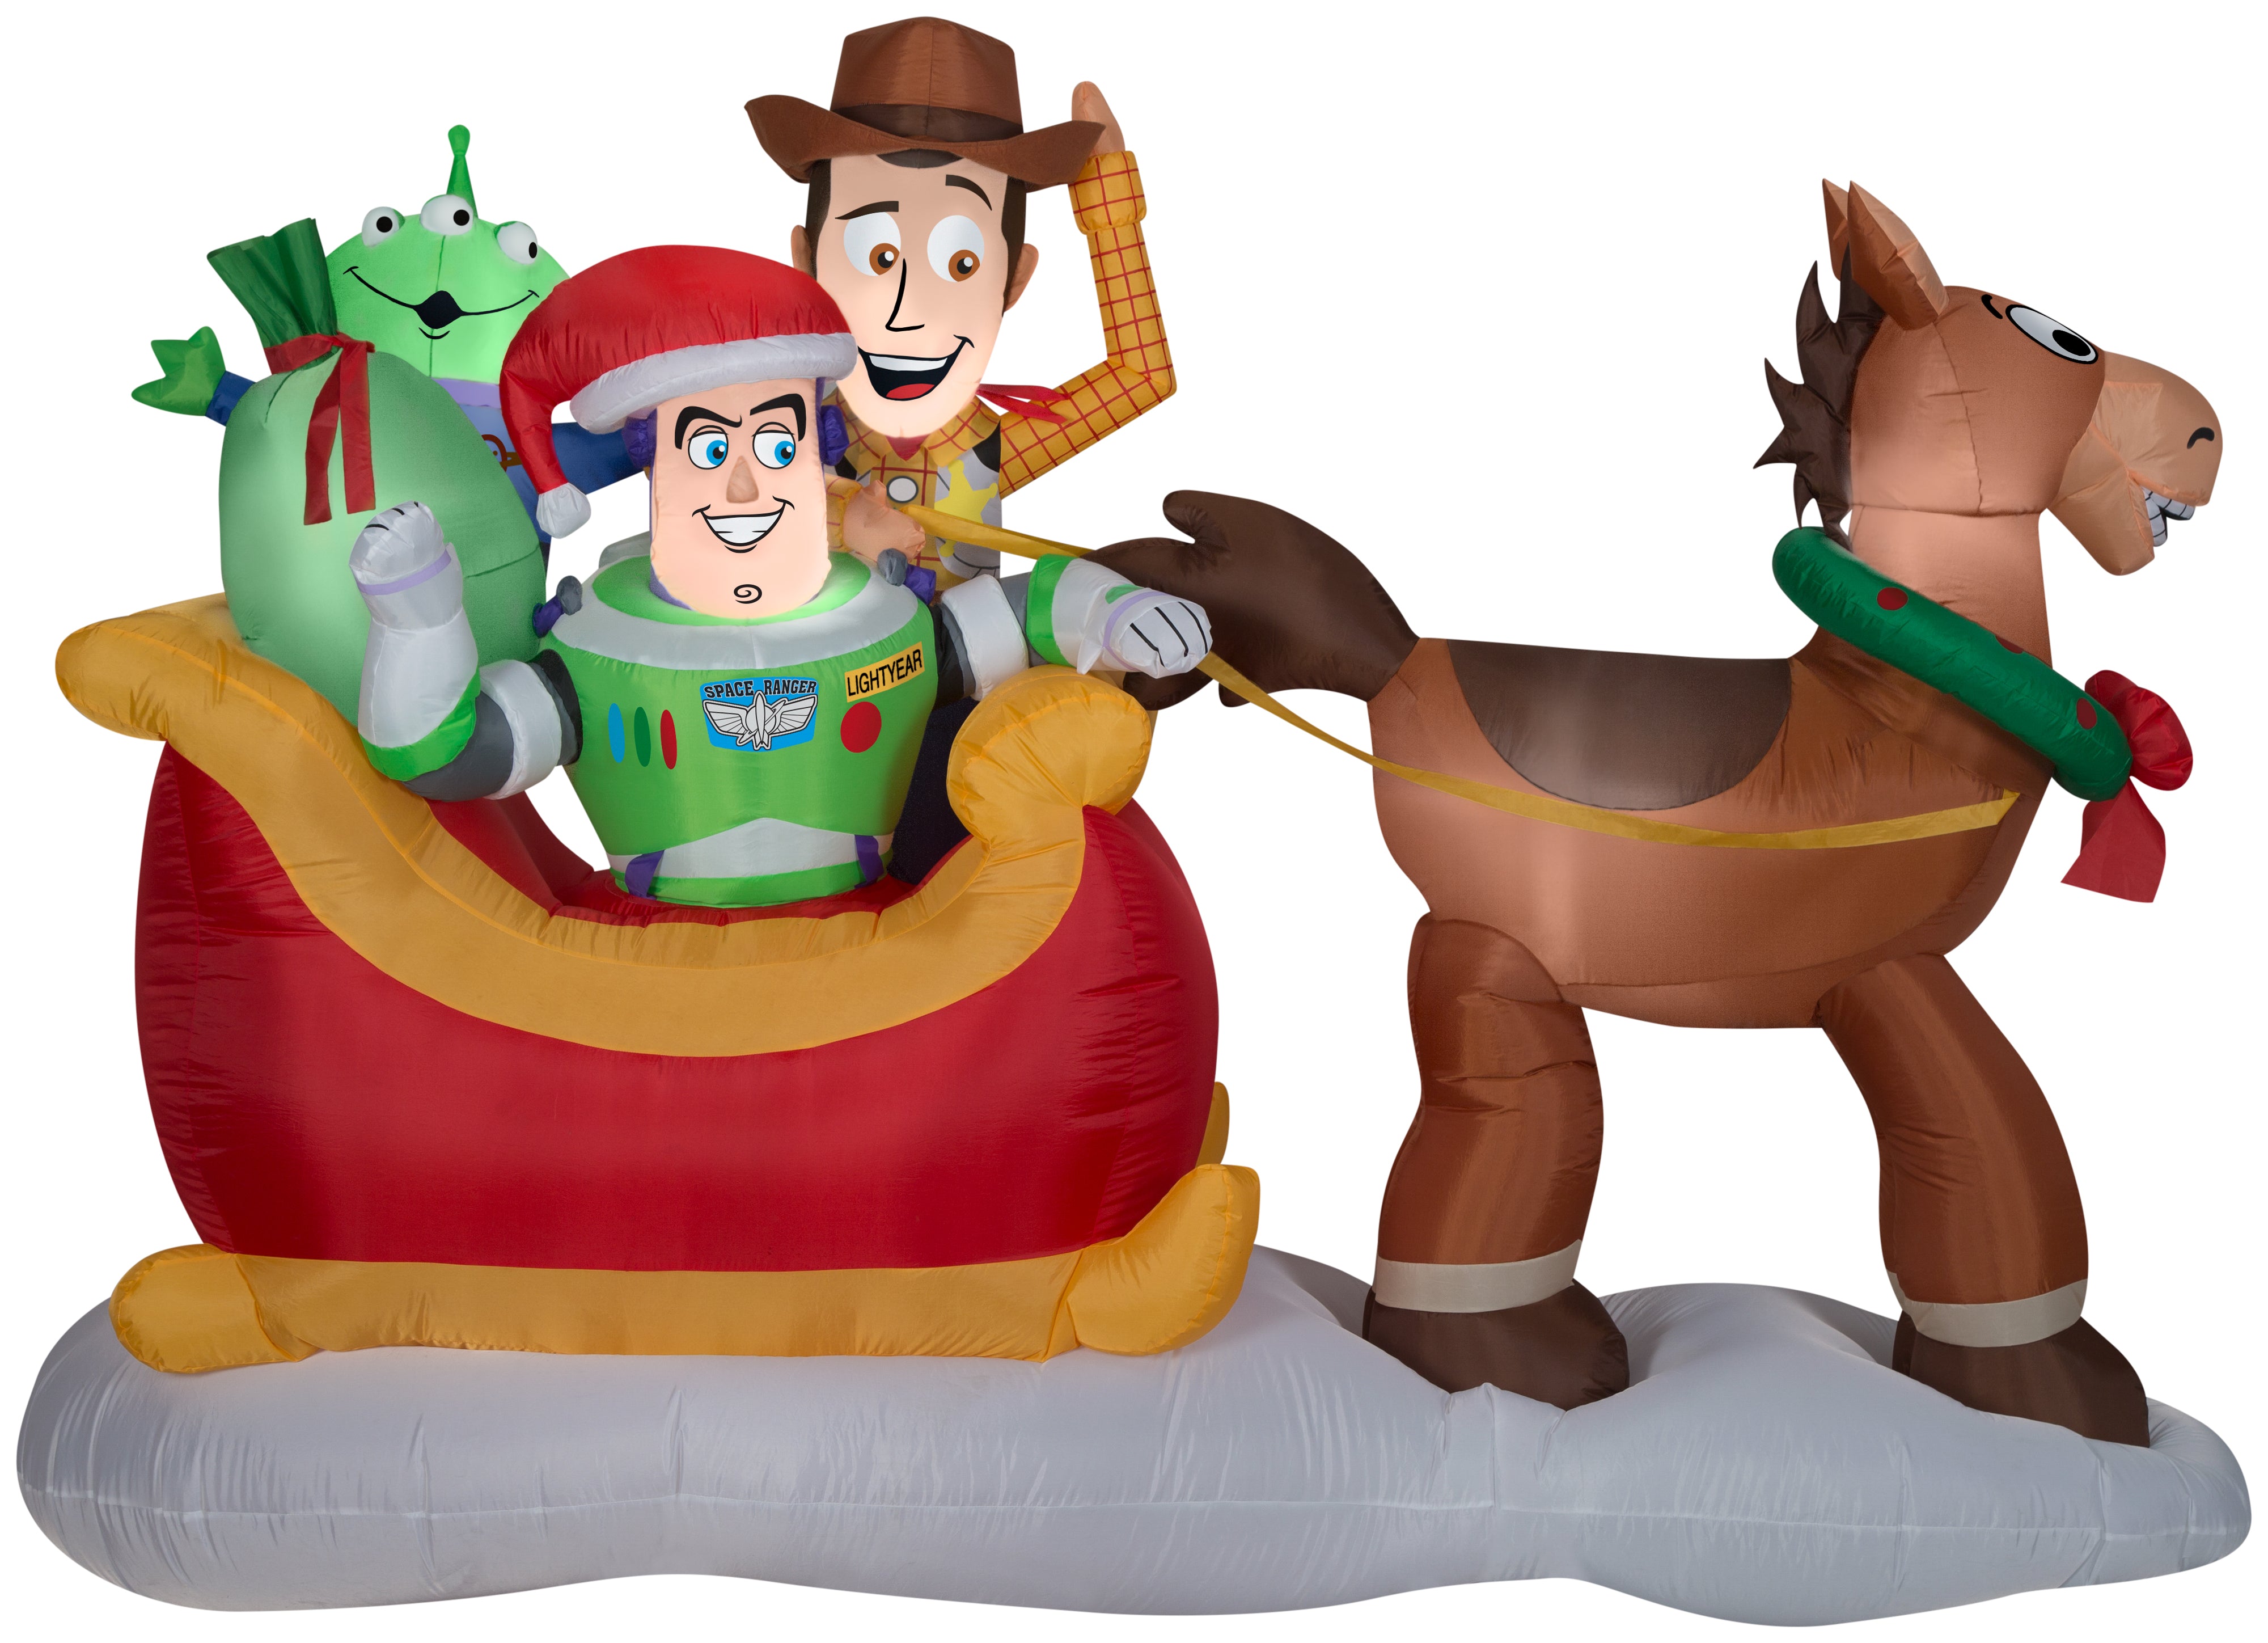 Gemmy Christmas Airblown Inflatable Toy Story w/Sleigh Scene Disney , 5 ft Tall, Multi